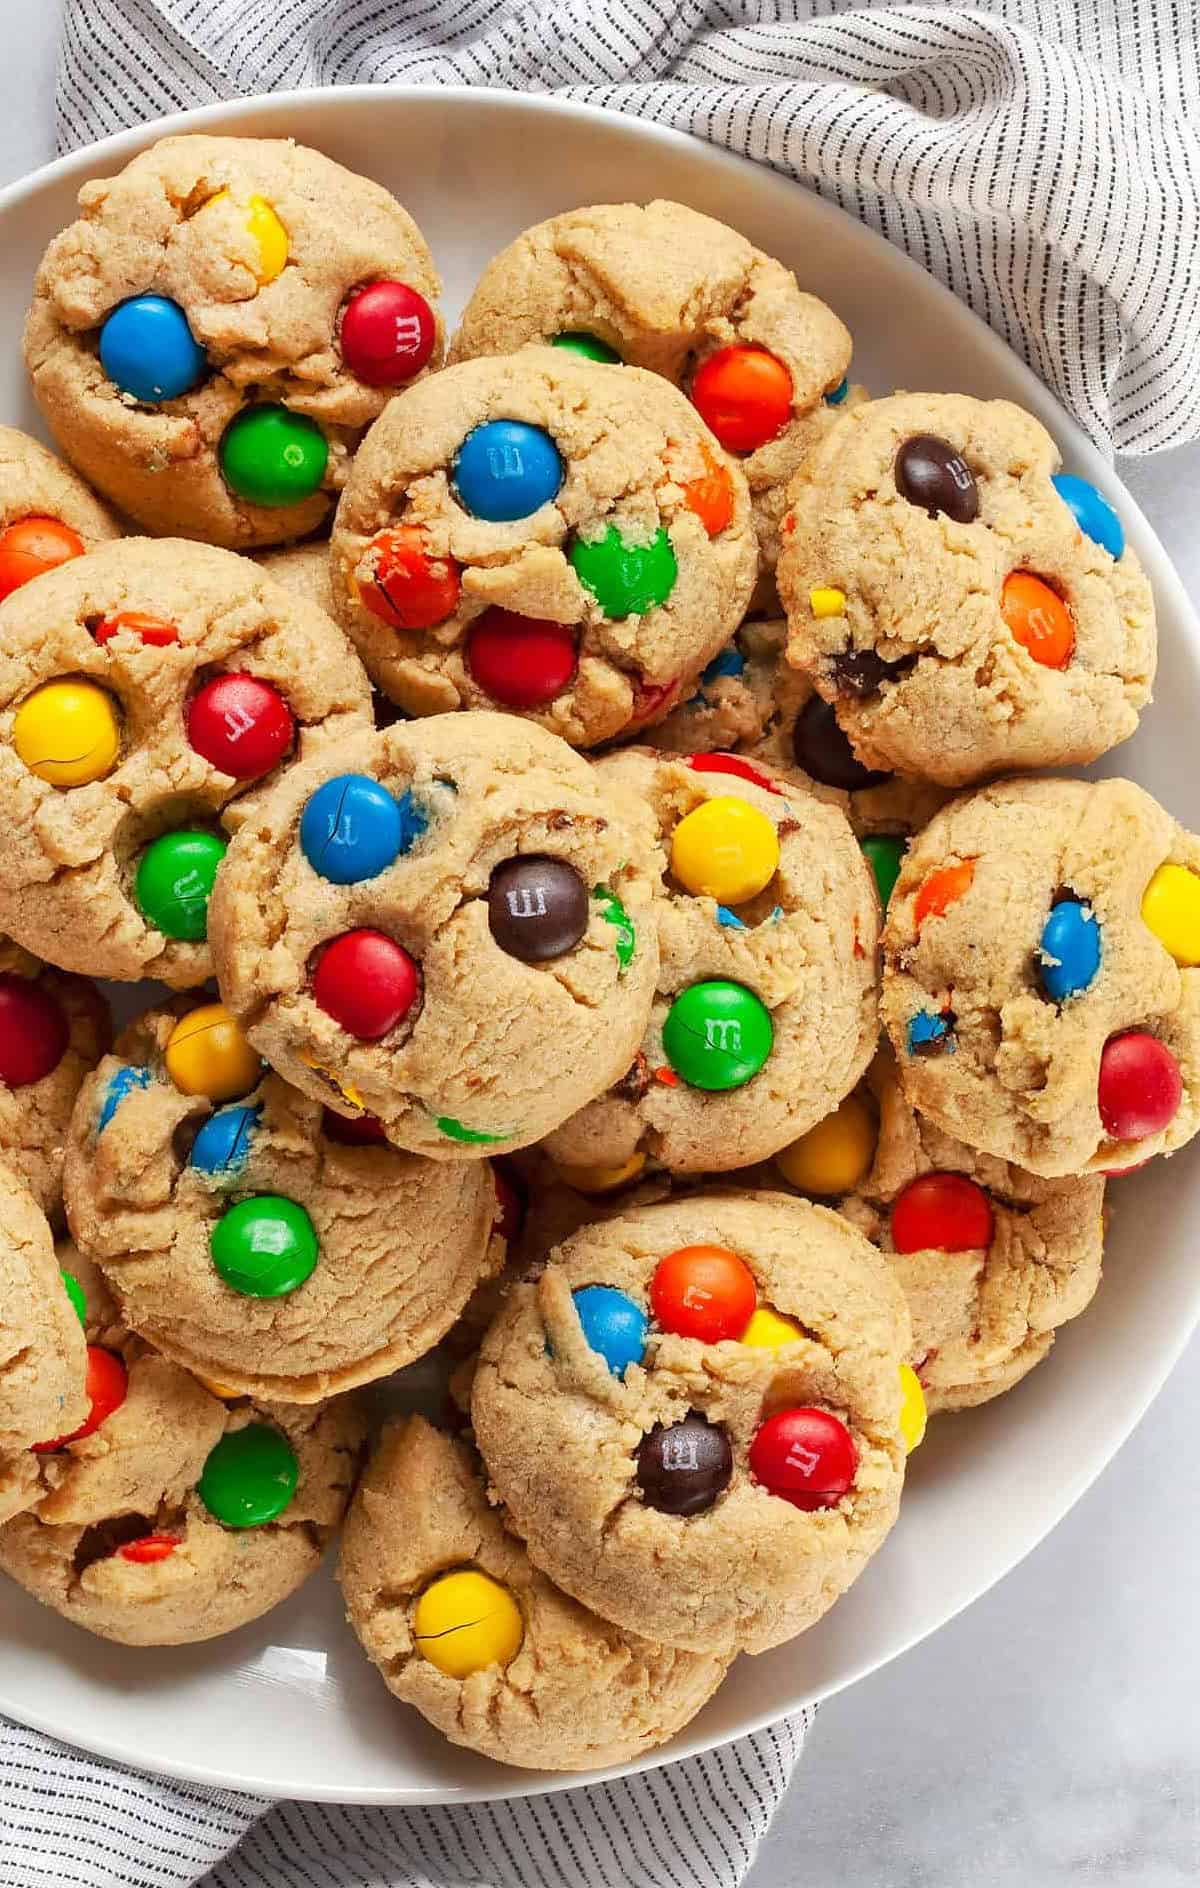  These cookies are packed with peanut butter flavor and a burst of color from the M&m's.